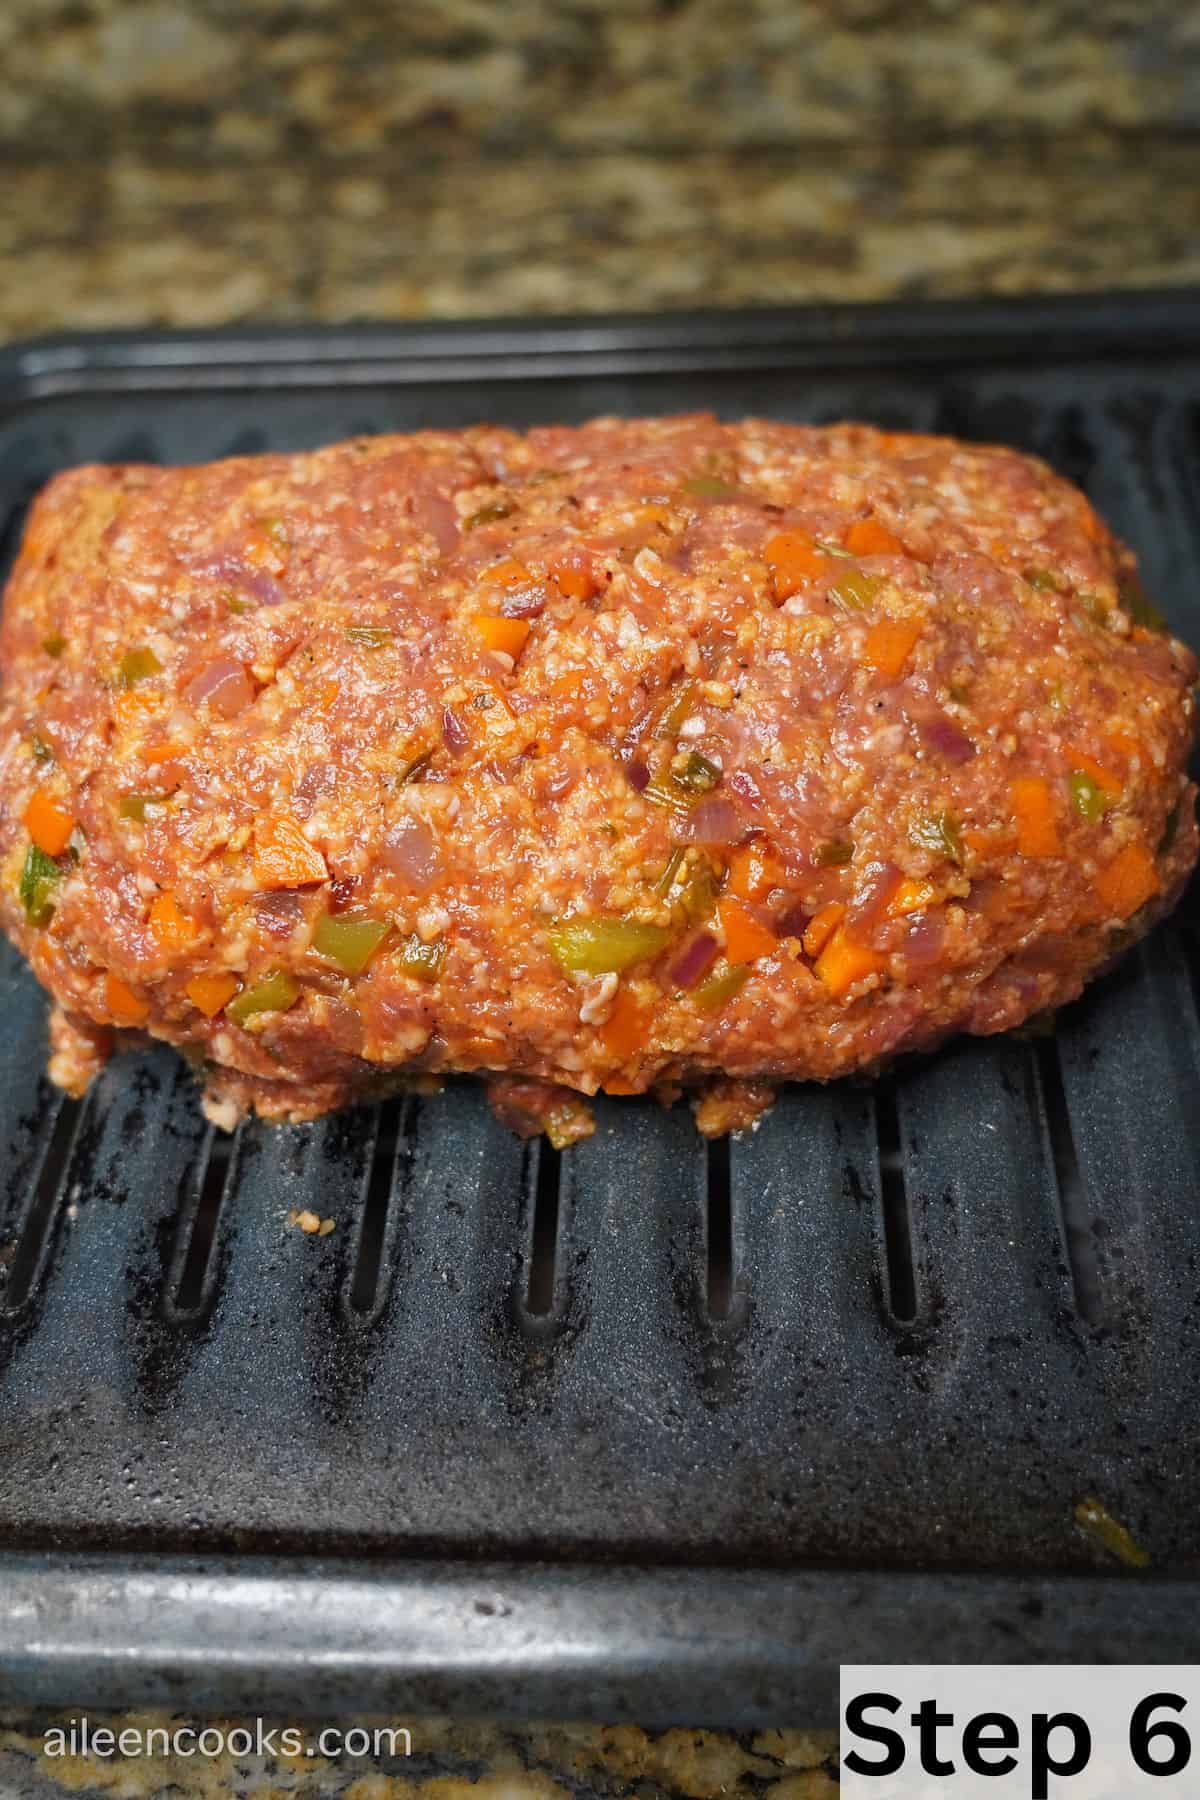 A meatloaf shaped on top of a broiler pan.